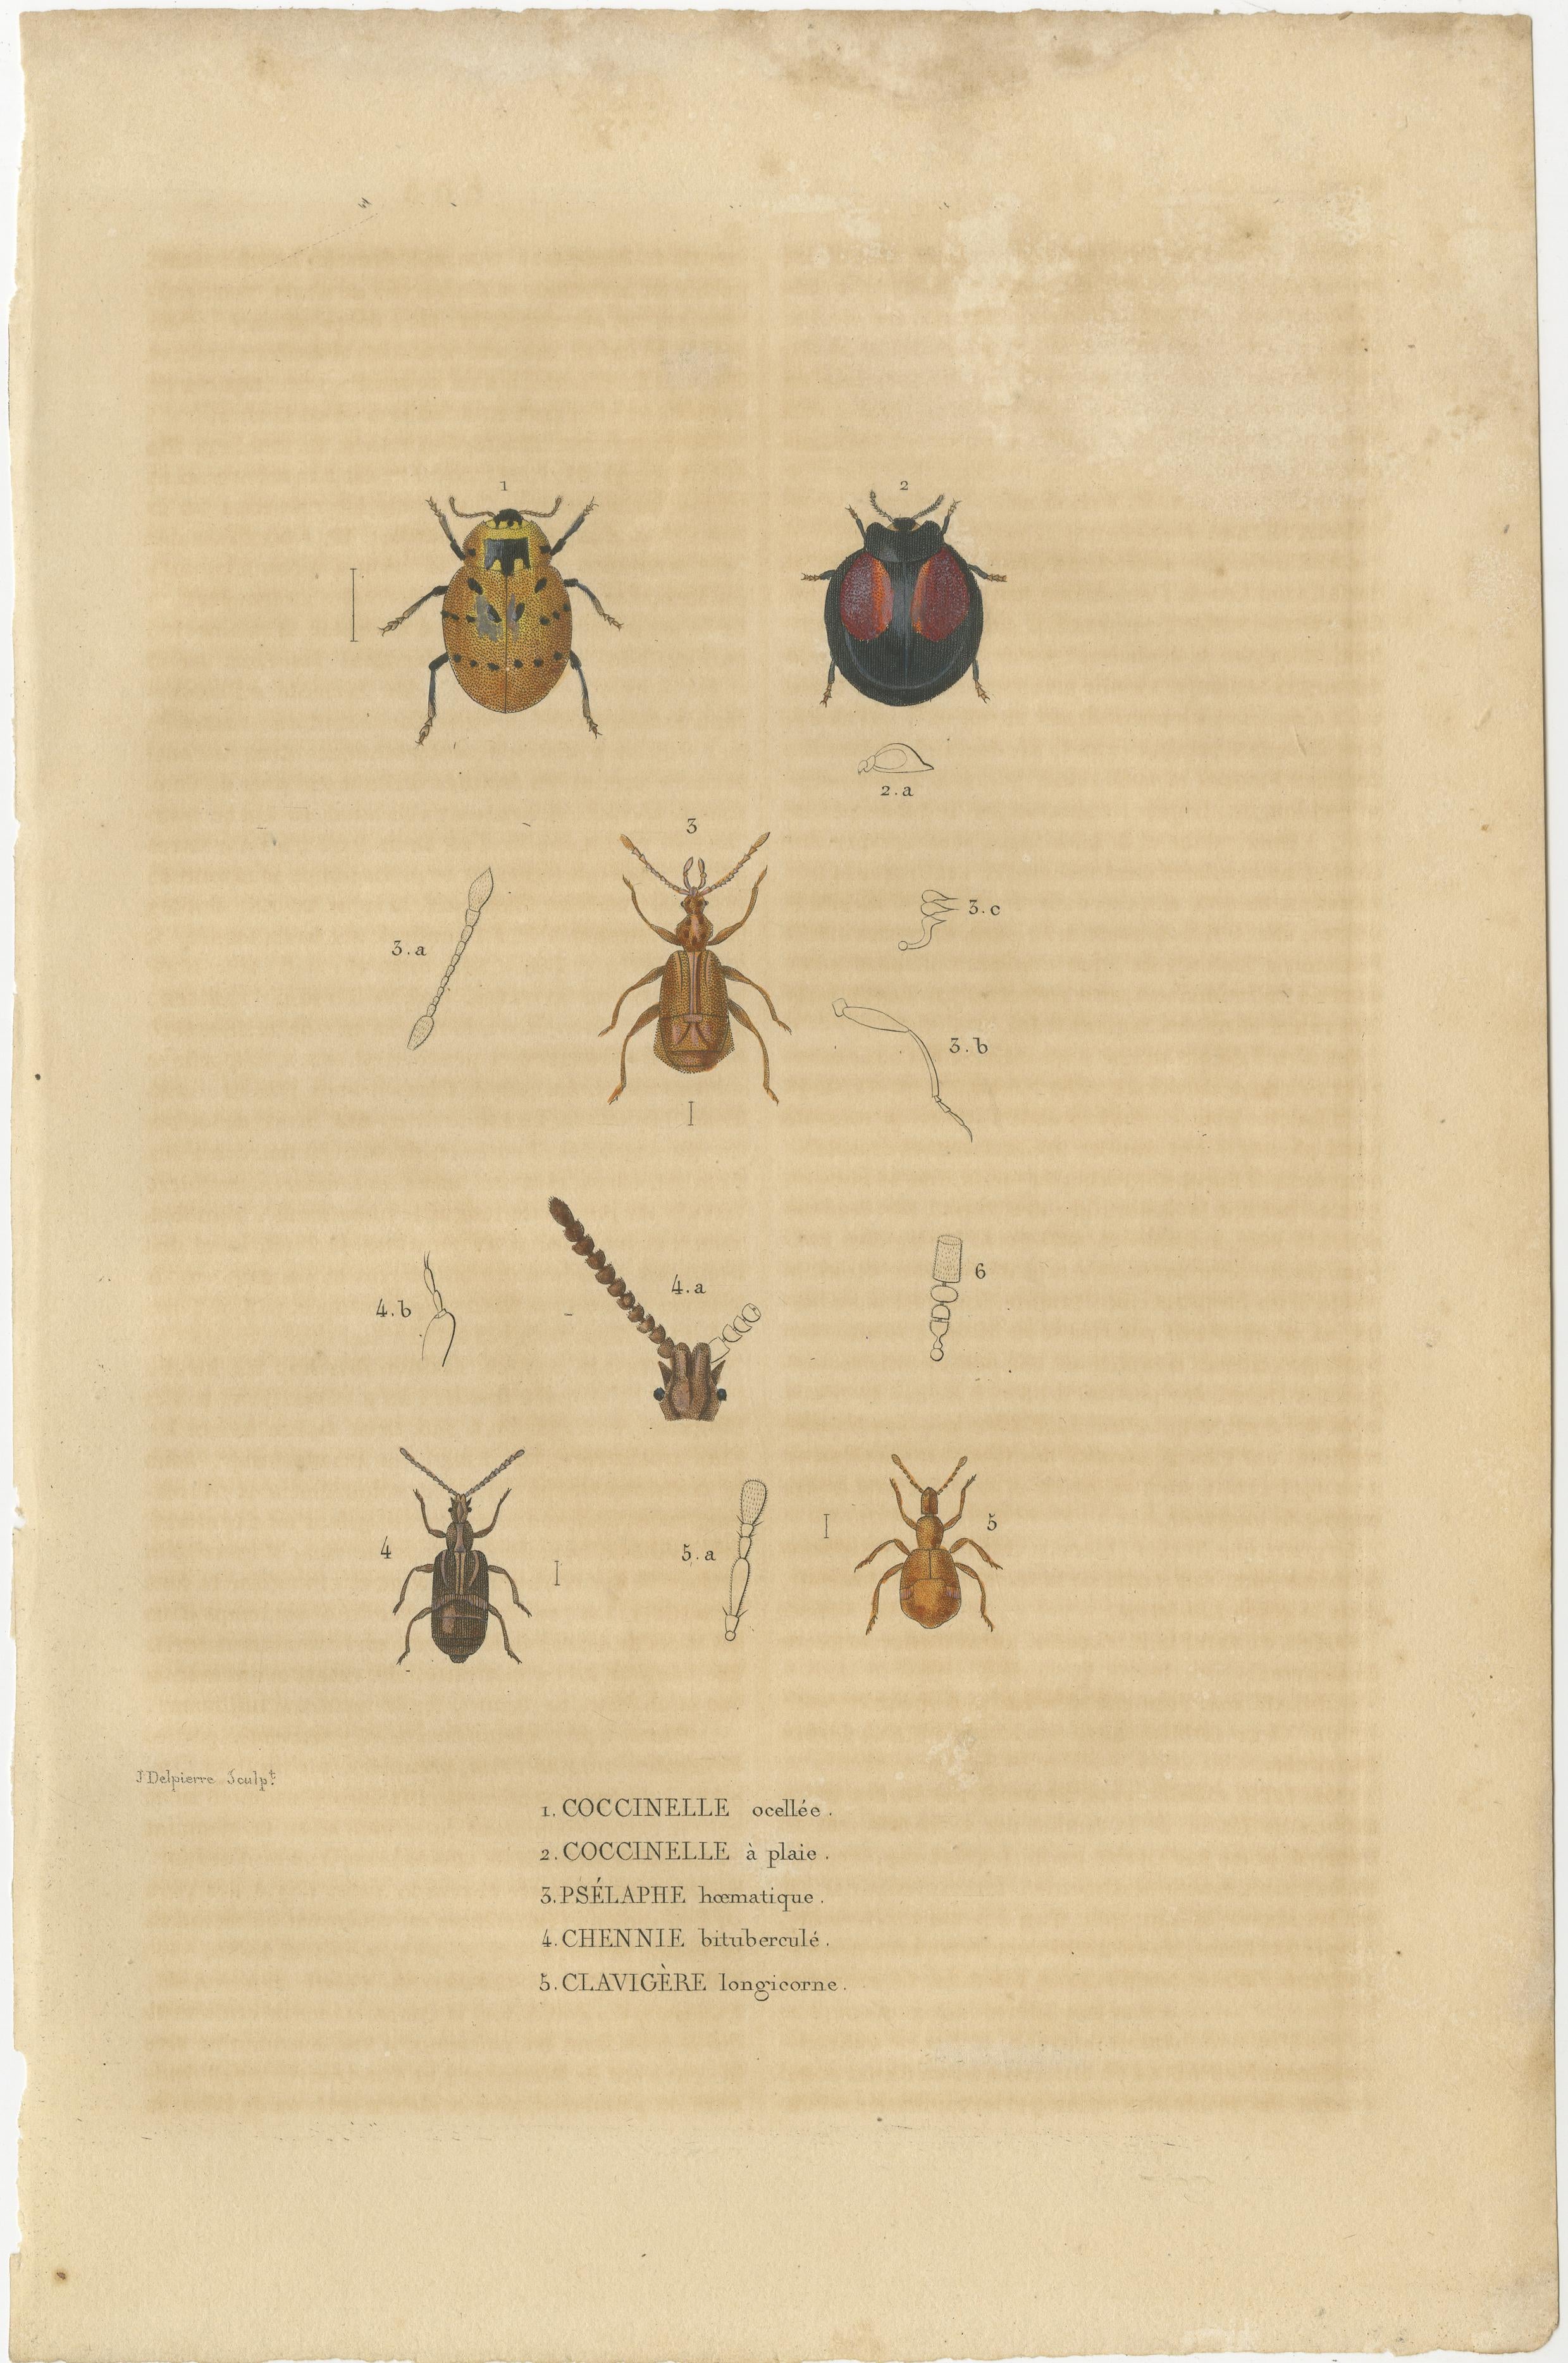 A set of four antique engravings from the year 1845, depicting various insects in a detailed and hand-colored manner. These illustrations are  from a scientific publication or a natural history book of that period, where such detailed engravings